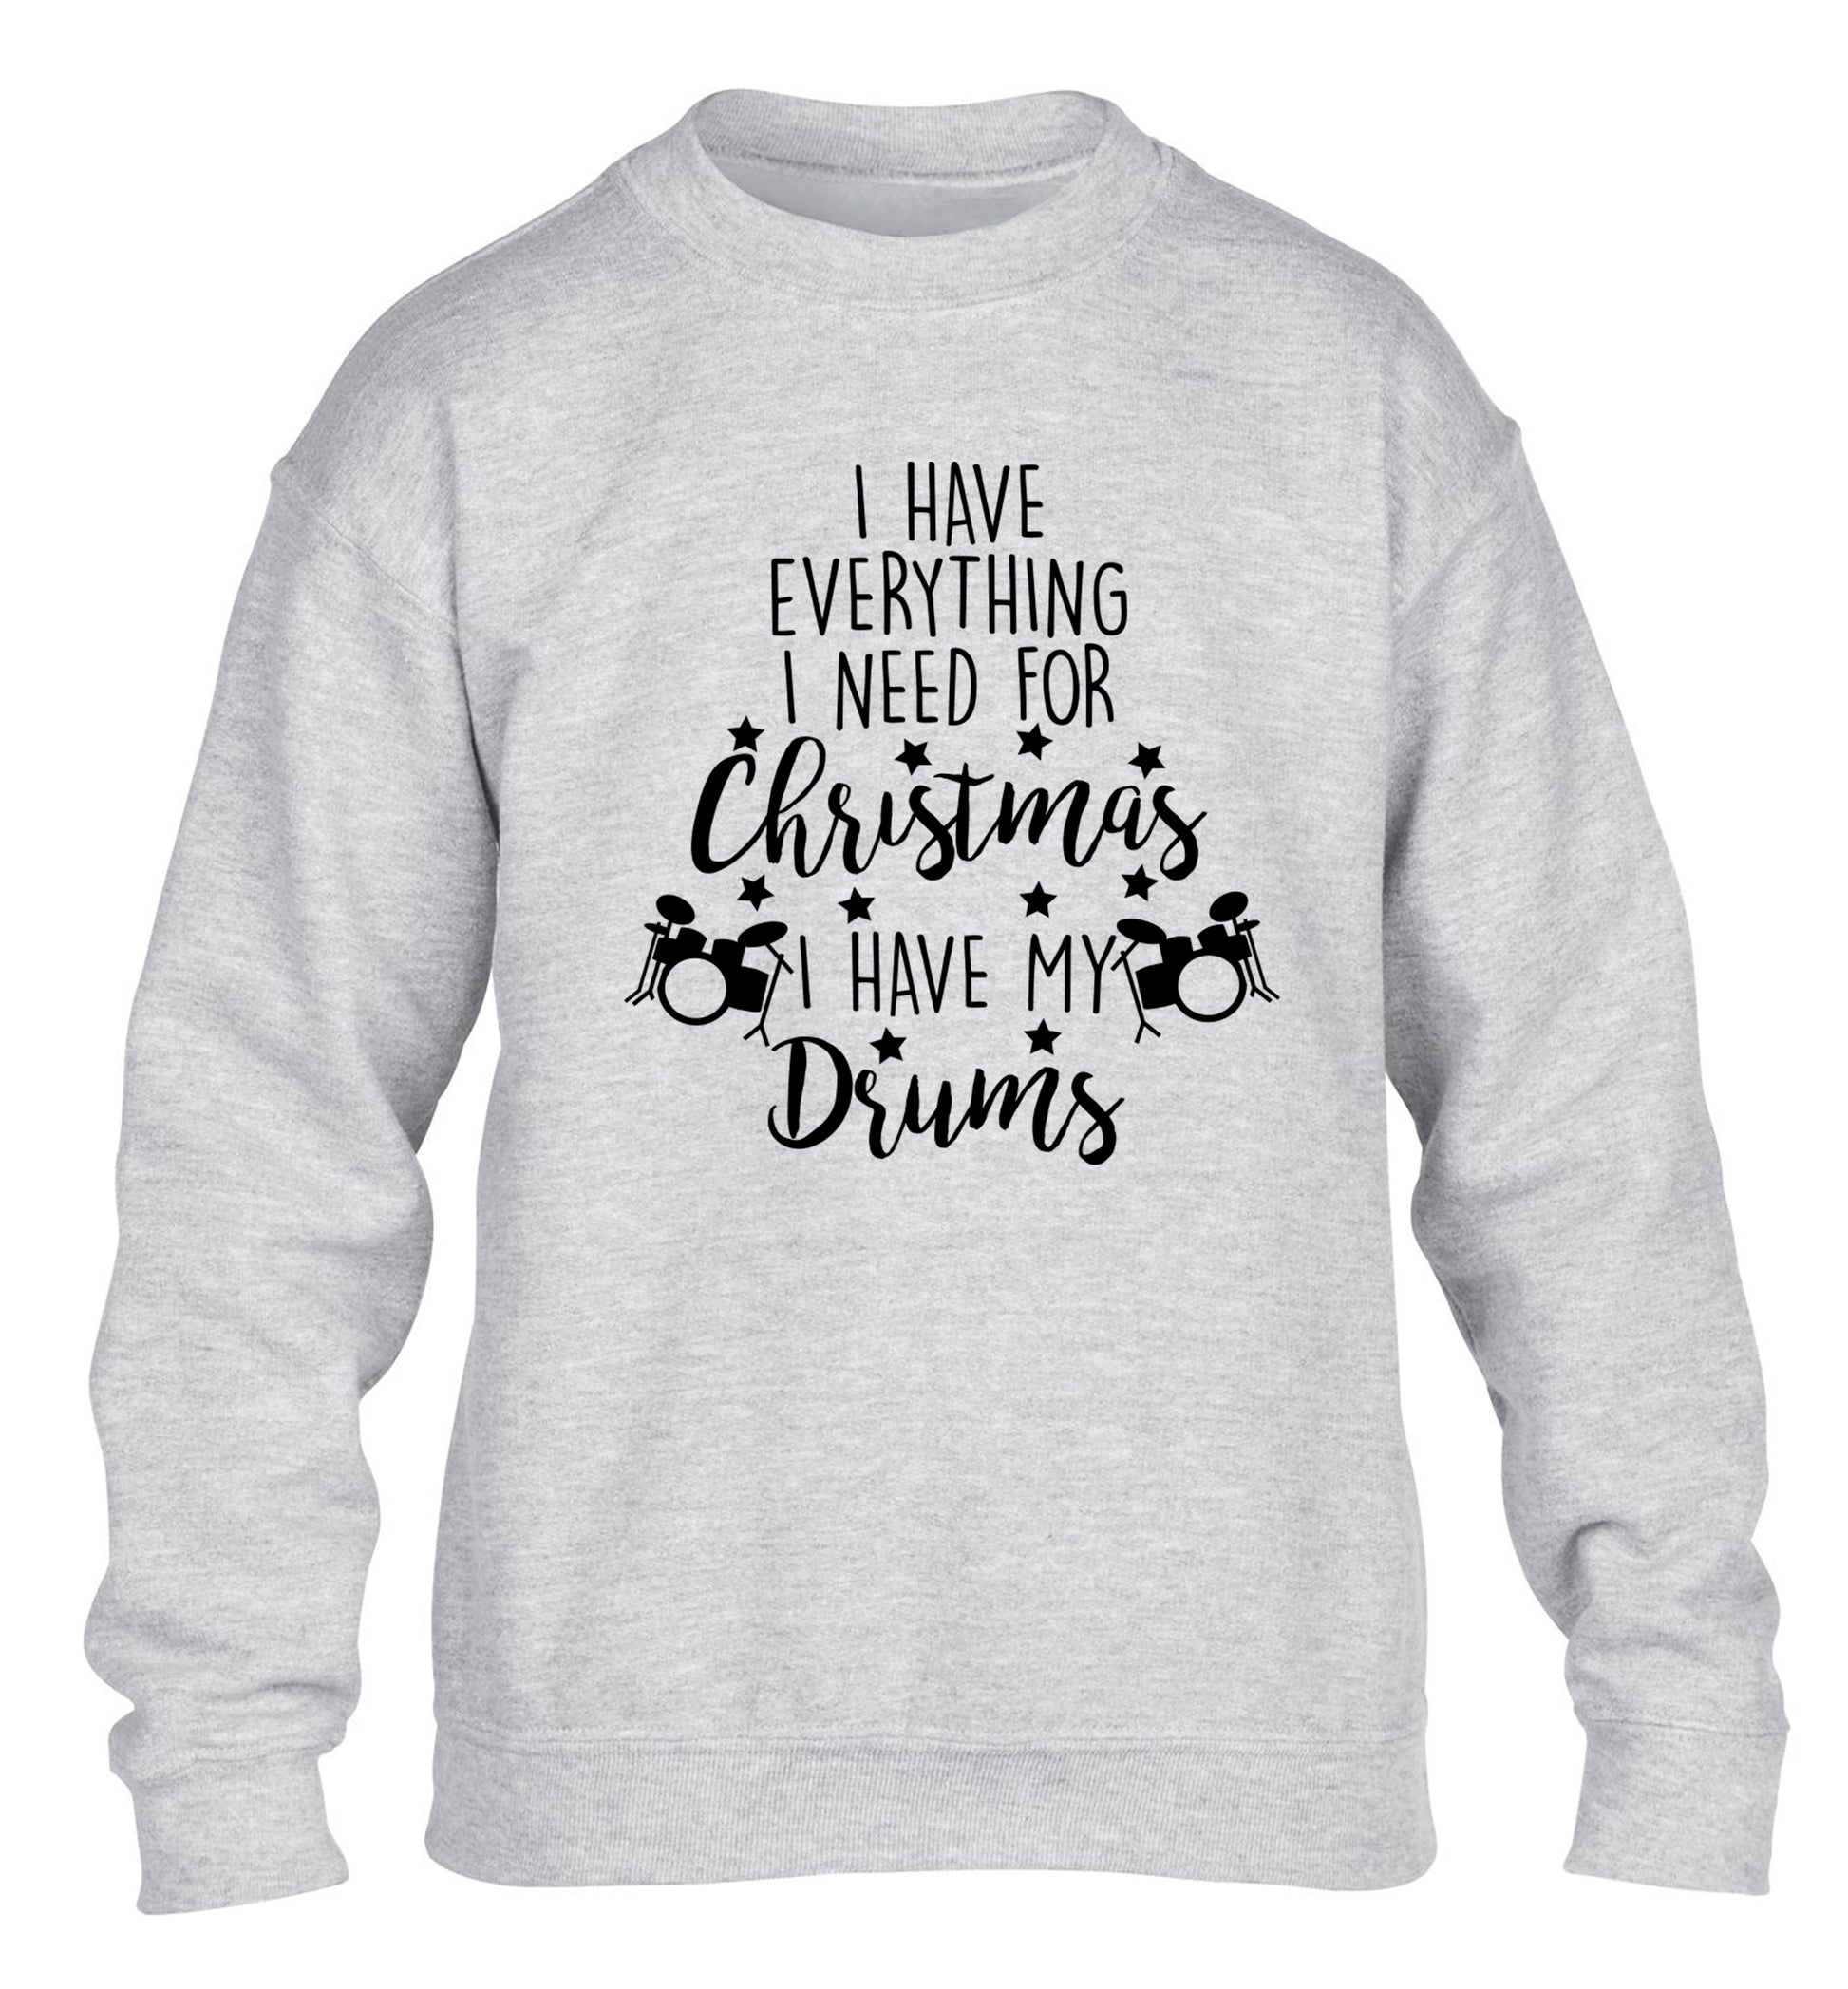 I have everything I need for Christmas I have my drums! children's grey sweater 12-14 Years